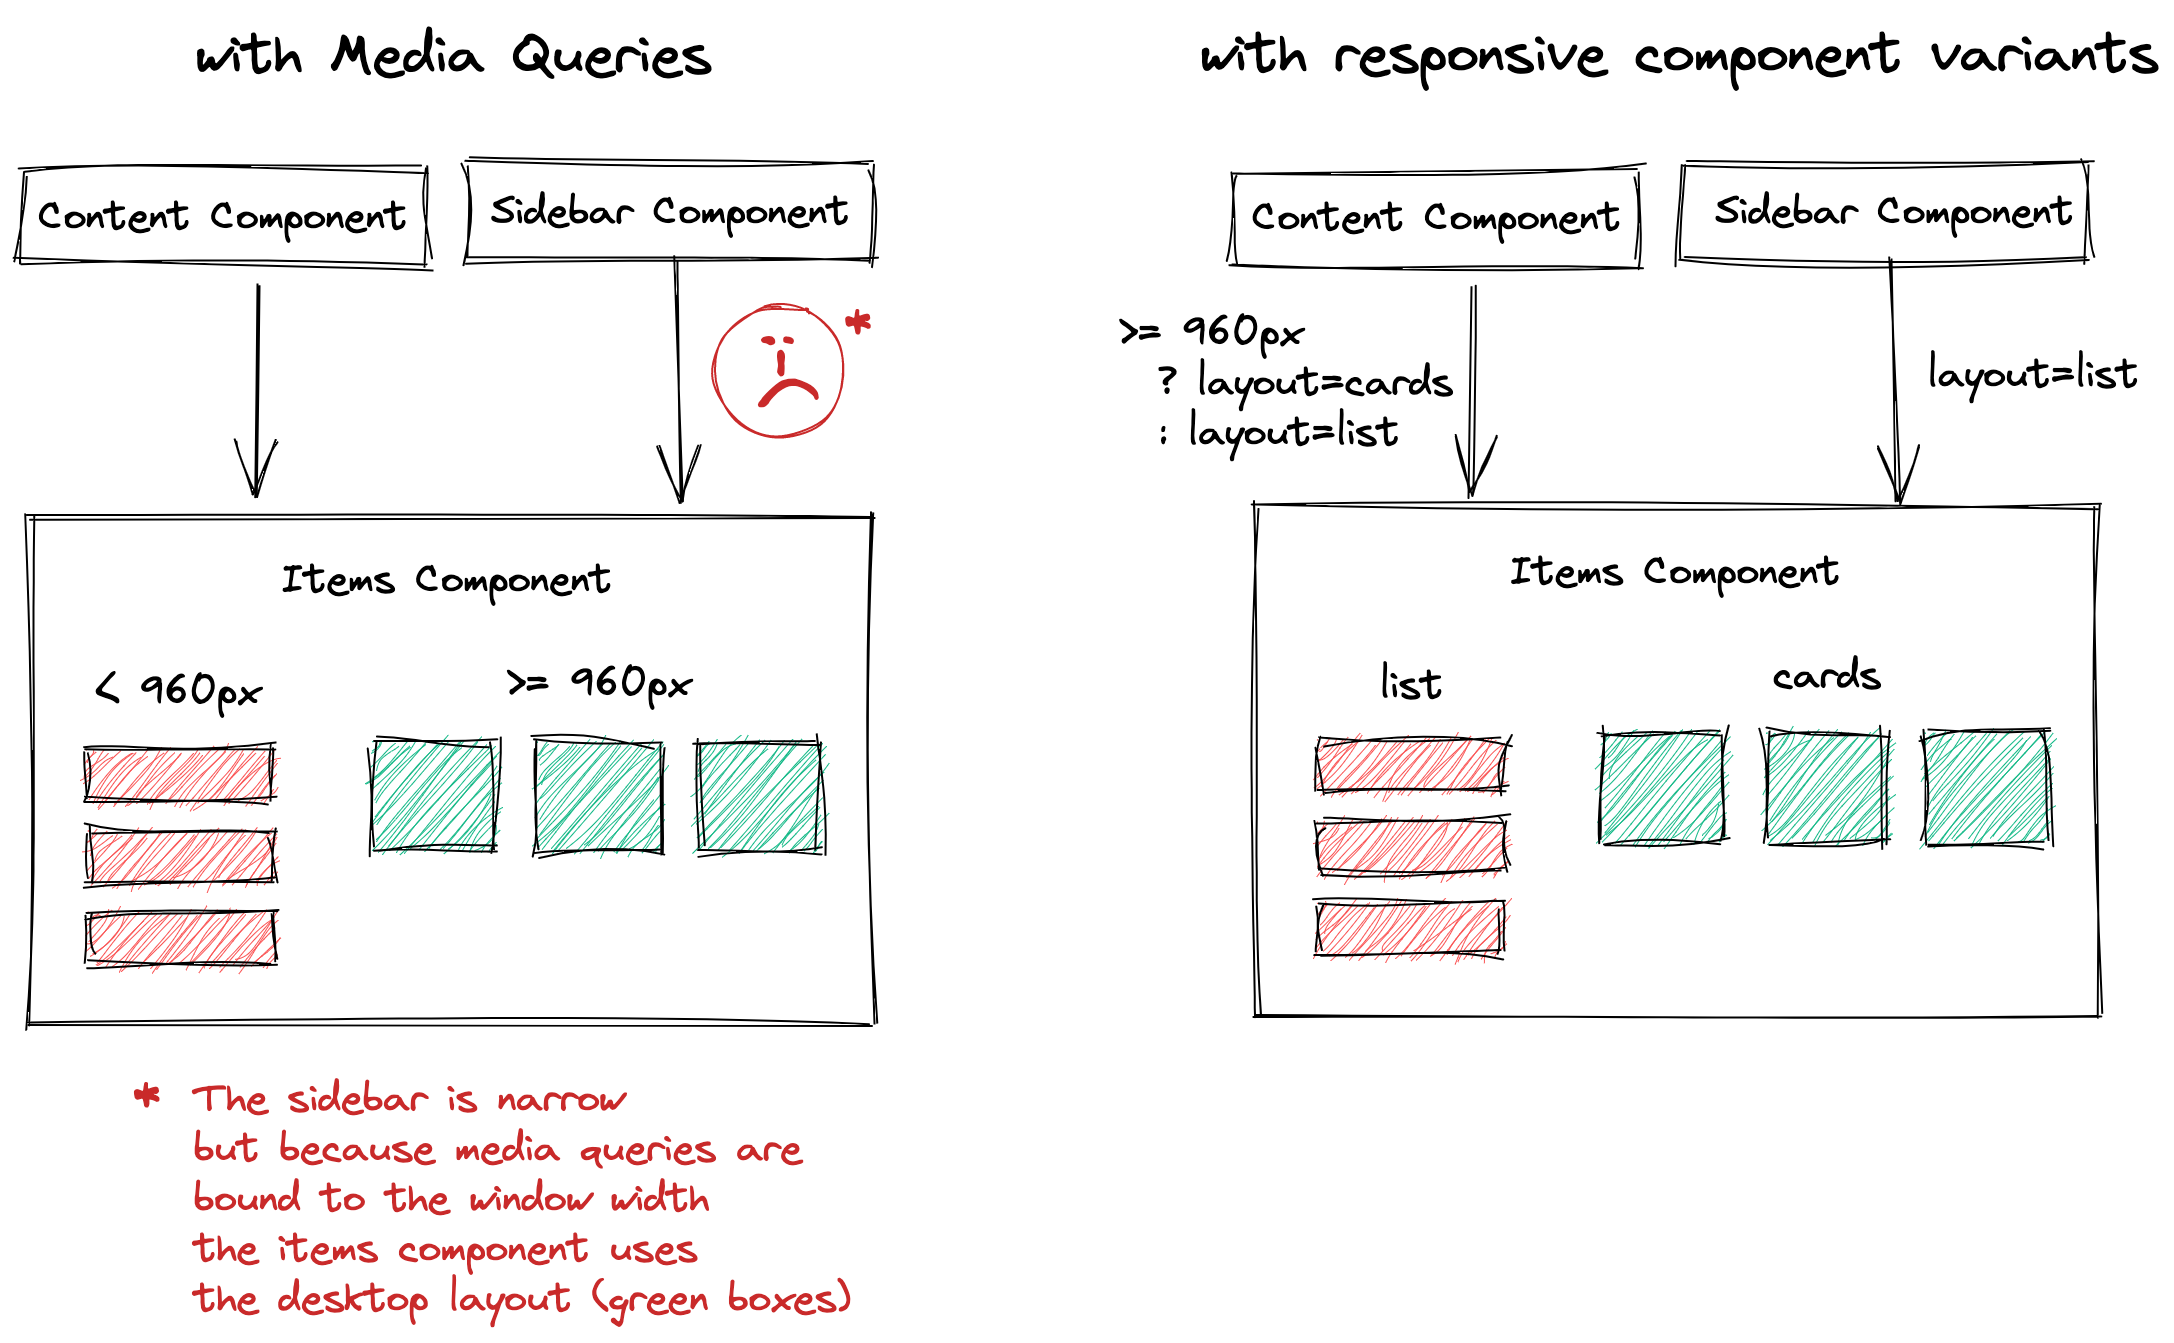 Parecer Fantasía programa Build better responsive components in Angular with Component Variants |  Articles | Sandro Roth